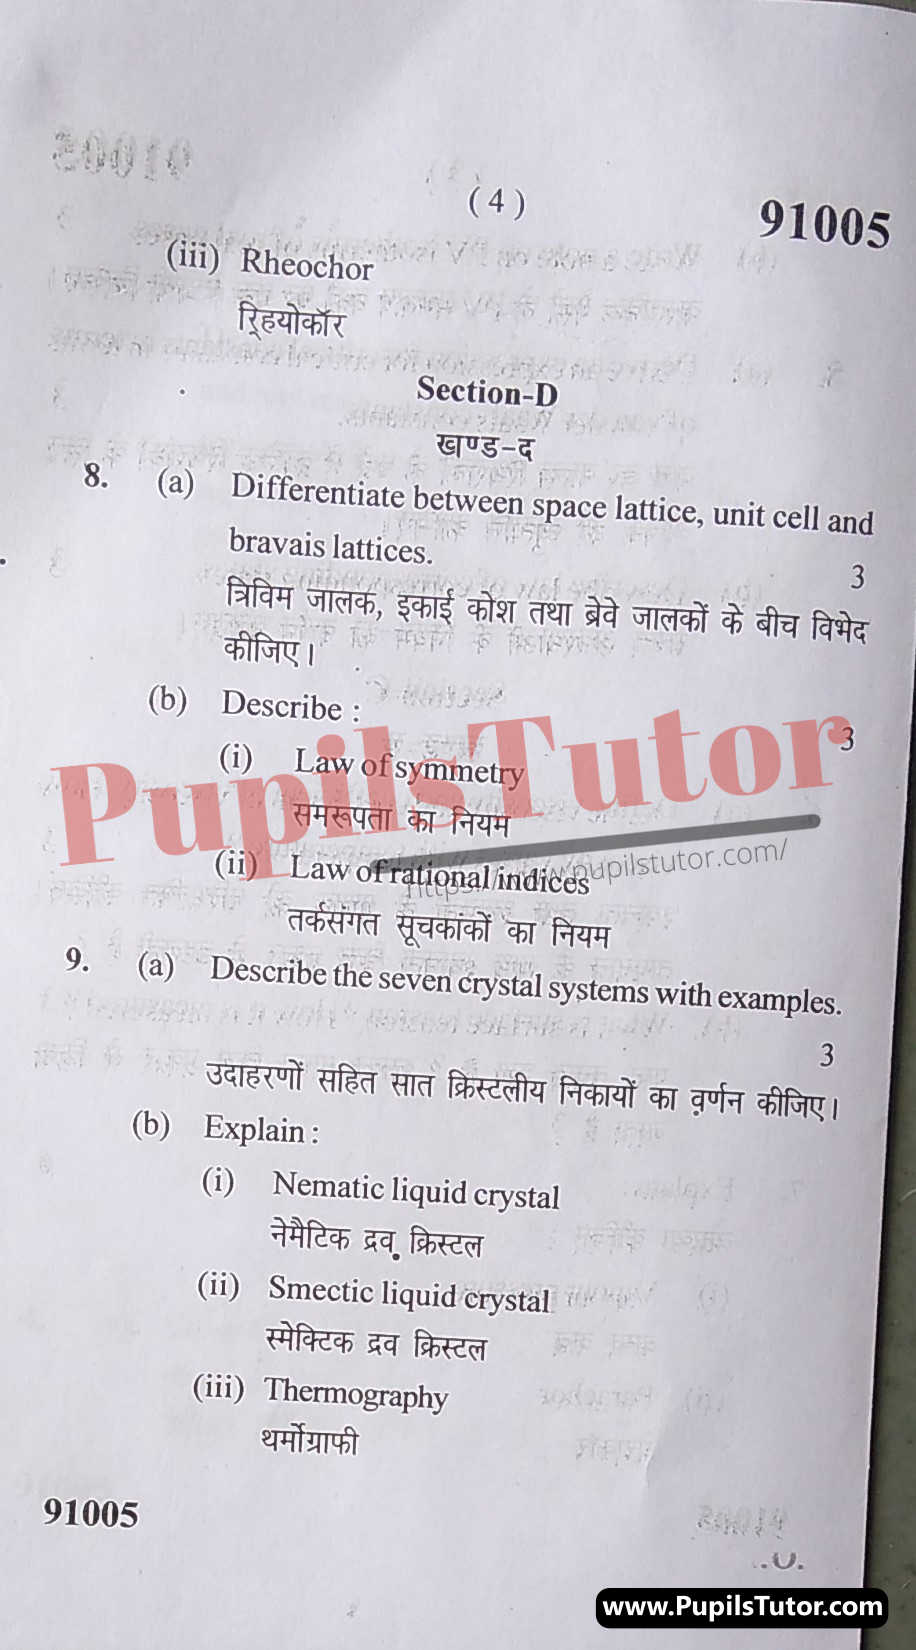 MDU (Maharshi Dayanand University, Rohtak Haryana) Pass Course (B.Sc. [Chemistry] – Bachelor of Science) Physical Chemistry Important Questions Of February, 2021 Exam PDF Download Free (Page 4)